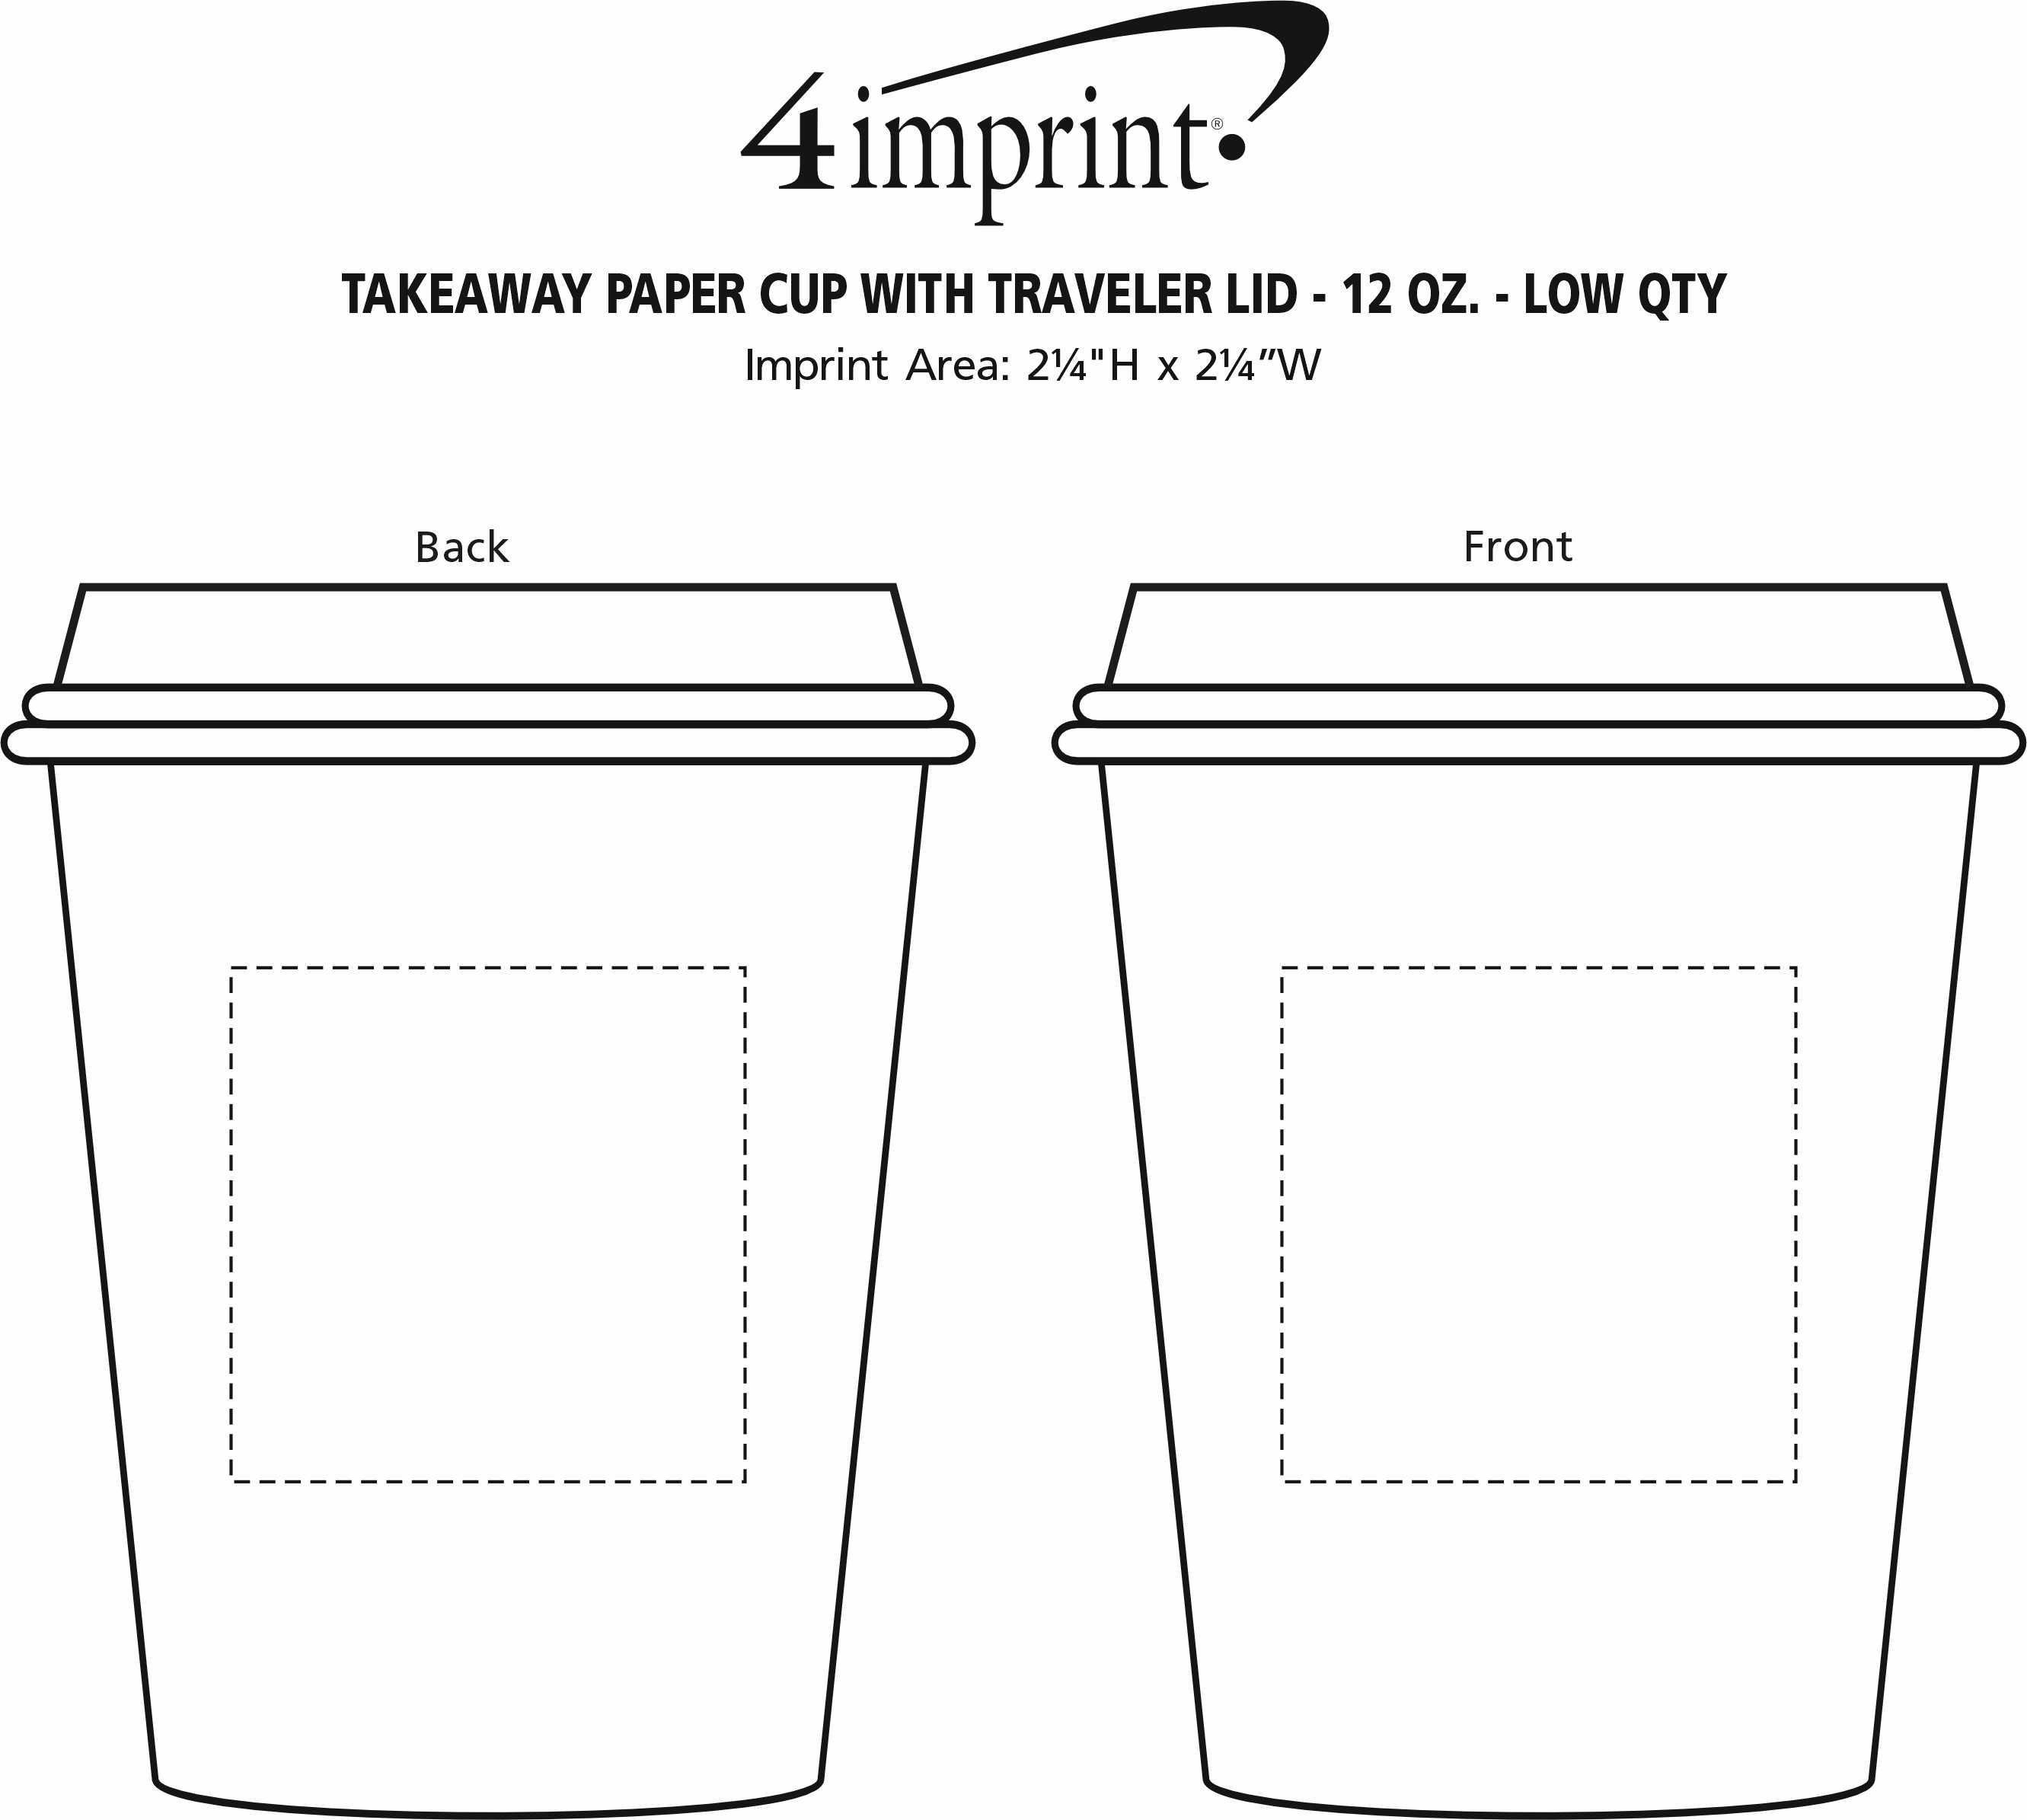 Imprint Area of Takeaway Paper Cup with Traveler Lid - 12 oz. - Low Qty